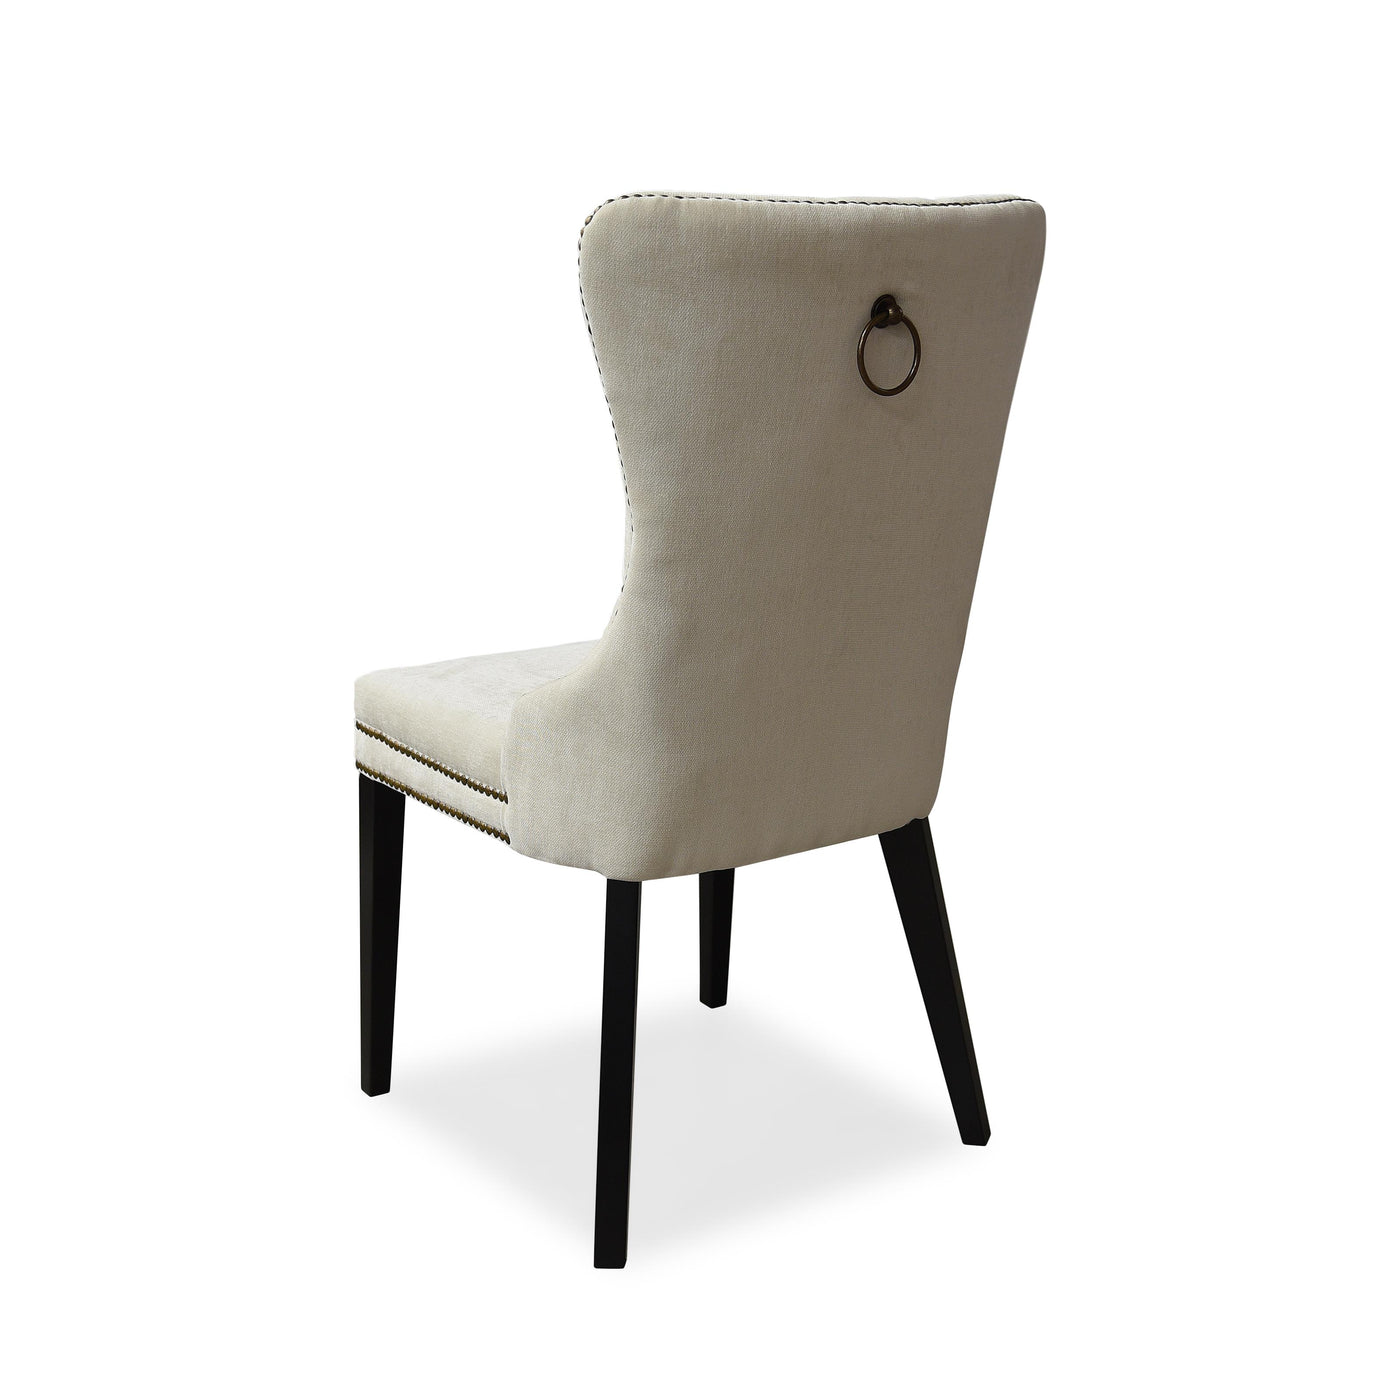 Luciano Dining Chair Ivory - Future Classics Furniture